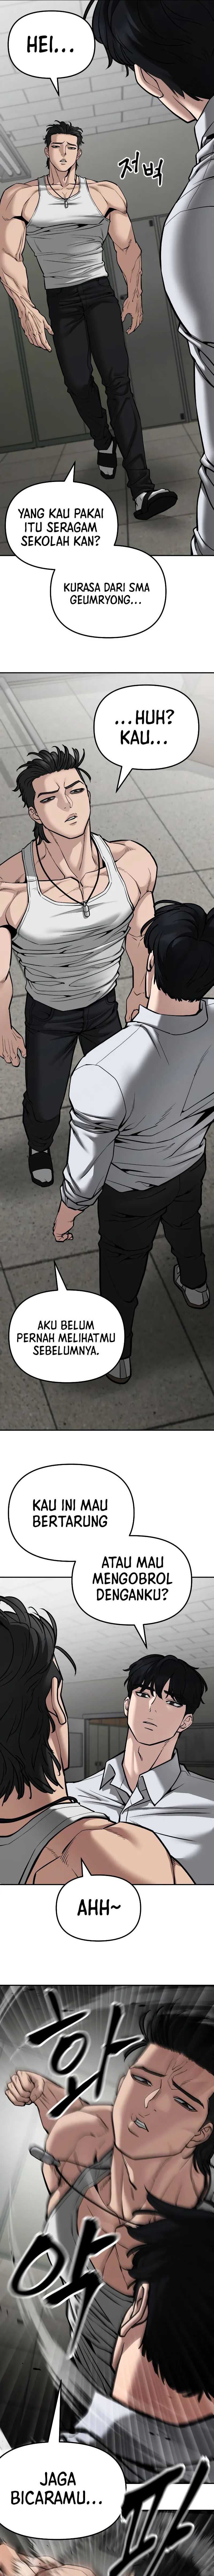 The Bully In Charge Chapter 80